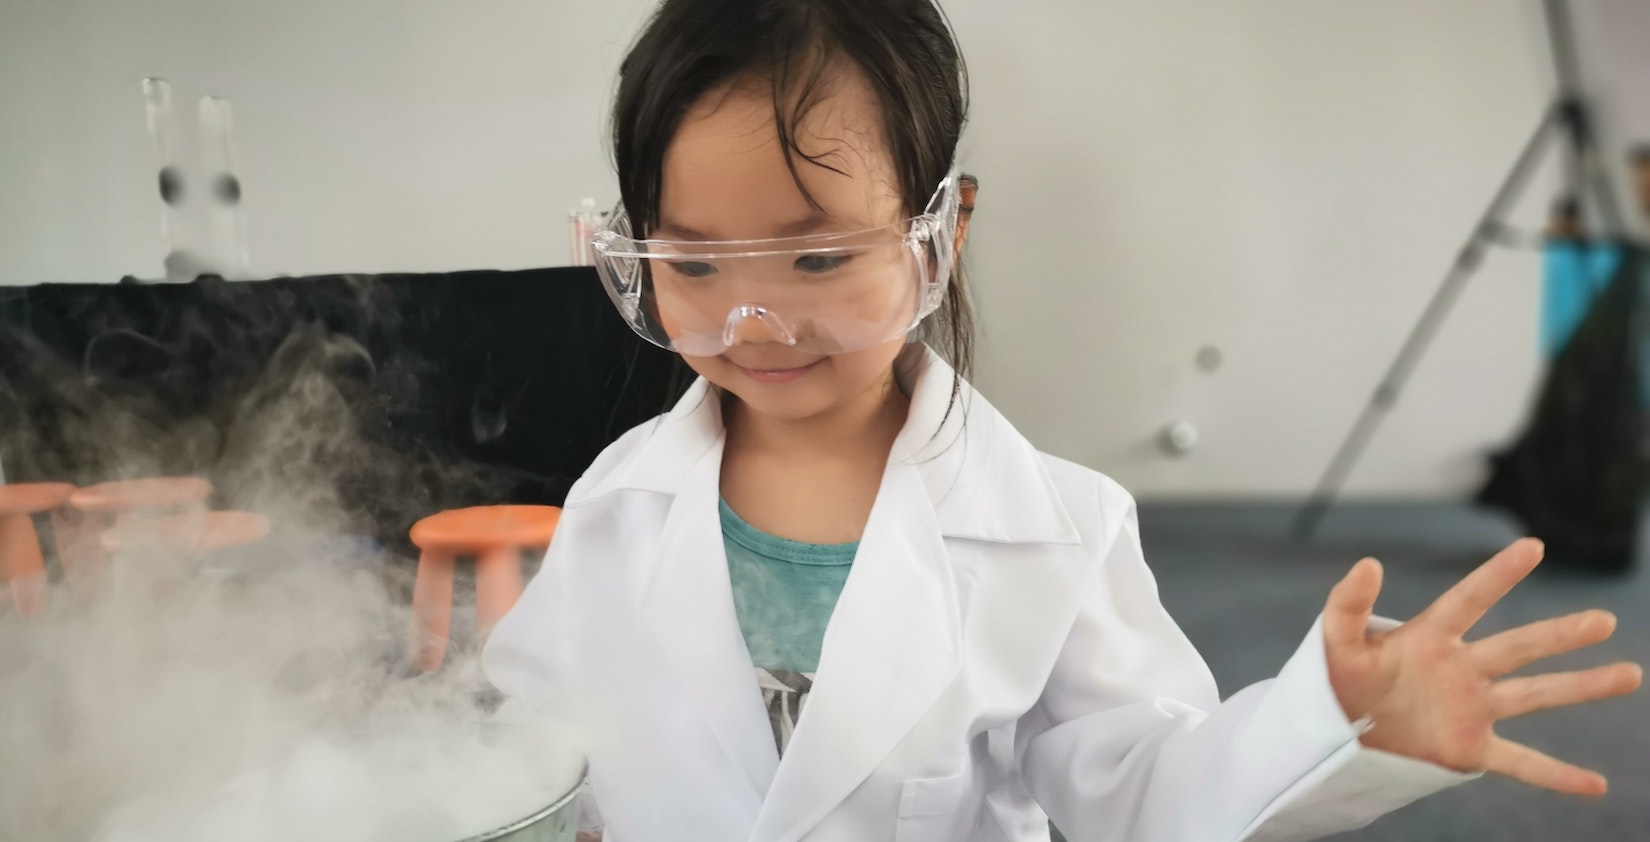 Little kid doing science experience with protection glasses on.